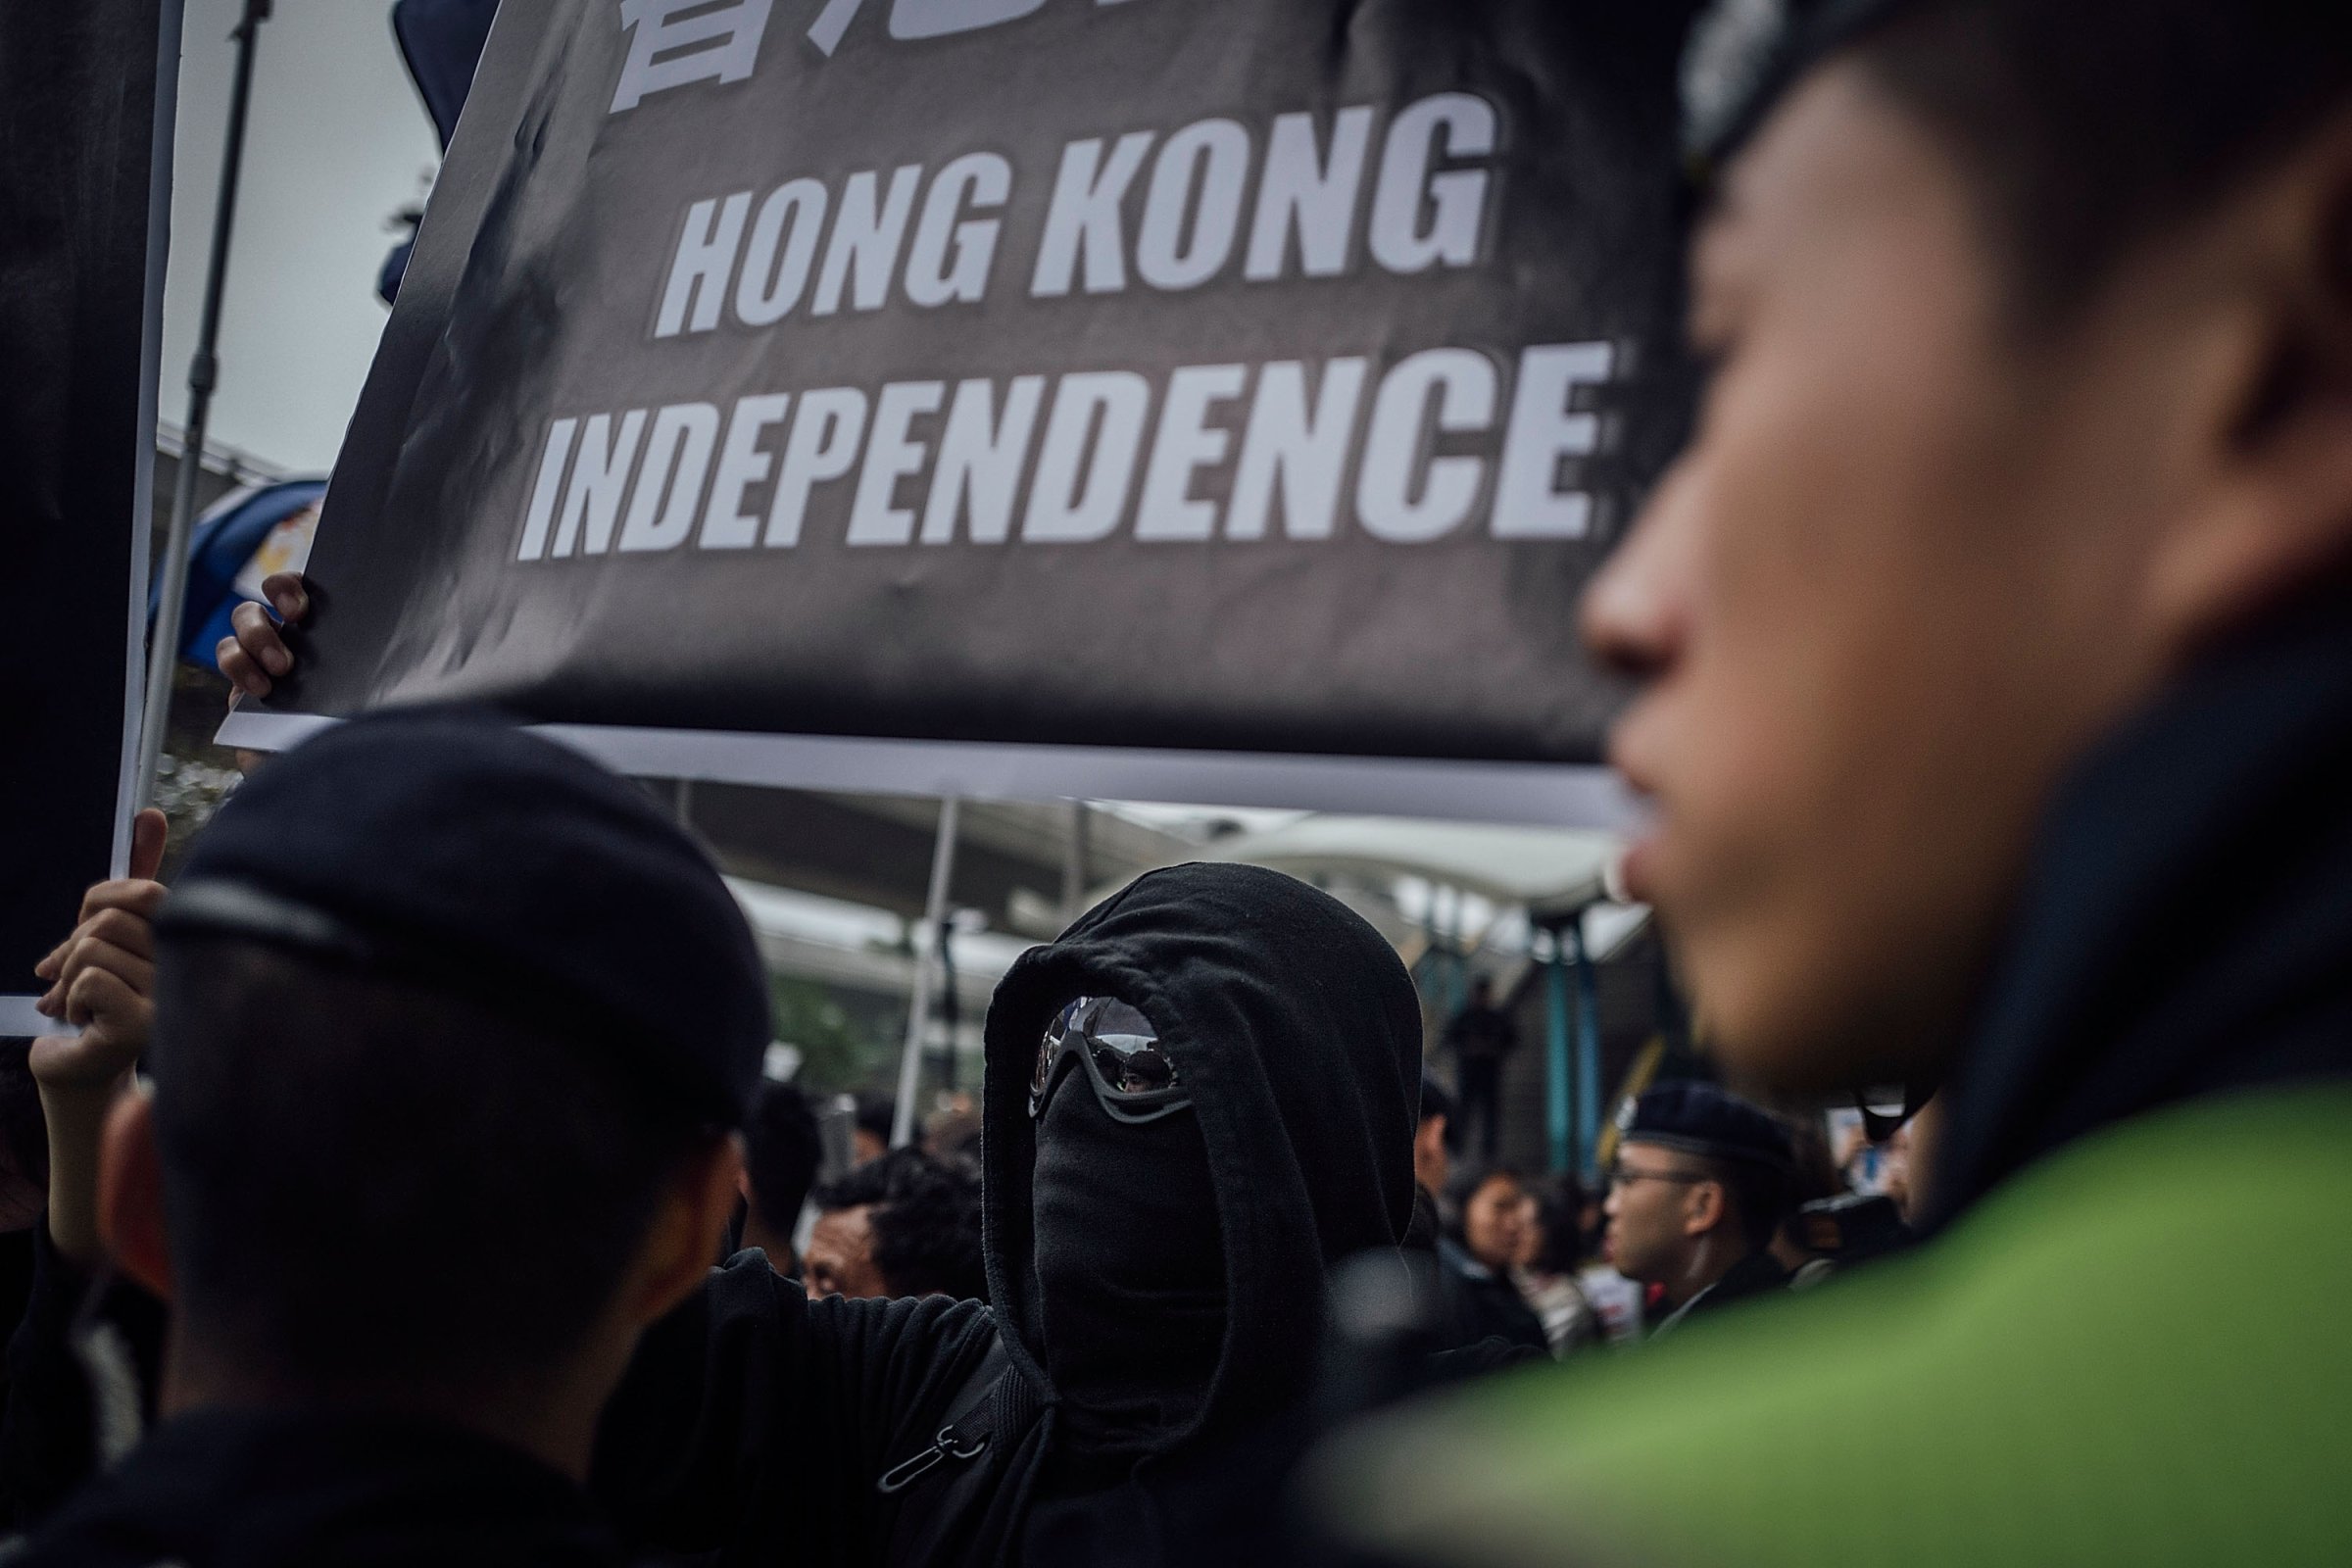 &lt;&gt; on January 10, 2016 in Hong Kong, Hong Kong. The disappearance of five Hong Kong booksellers, including UK passport holder Lee Bo, has sent shivers through Hong Kong as anxiety grows that Chinese control over the city is tightening.